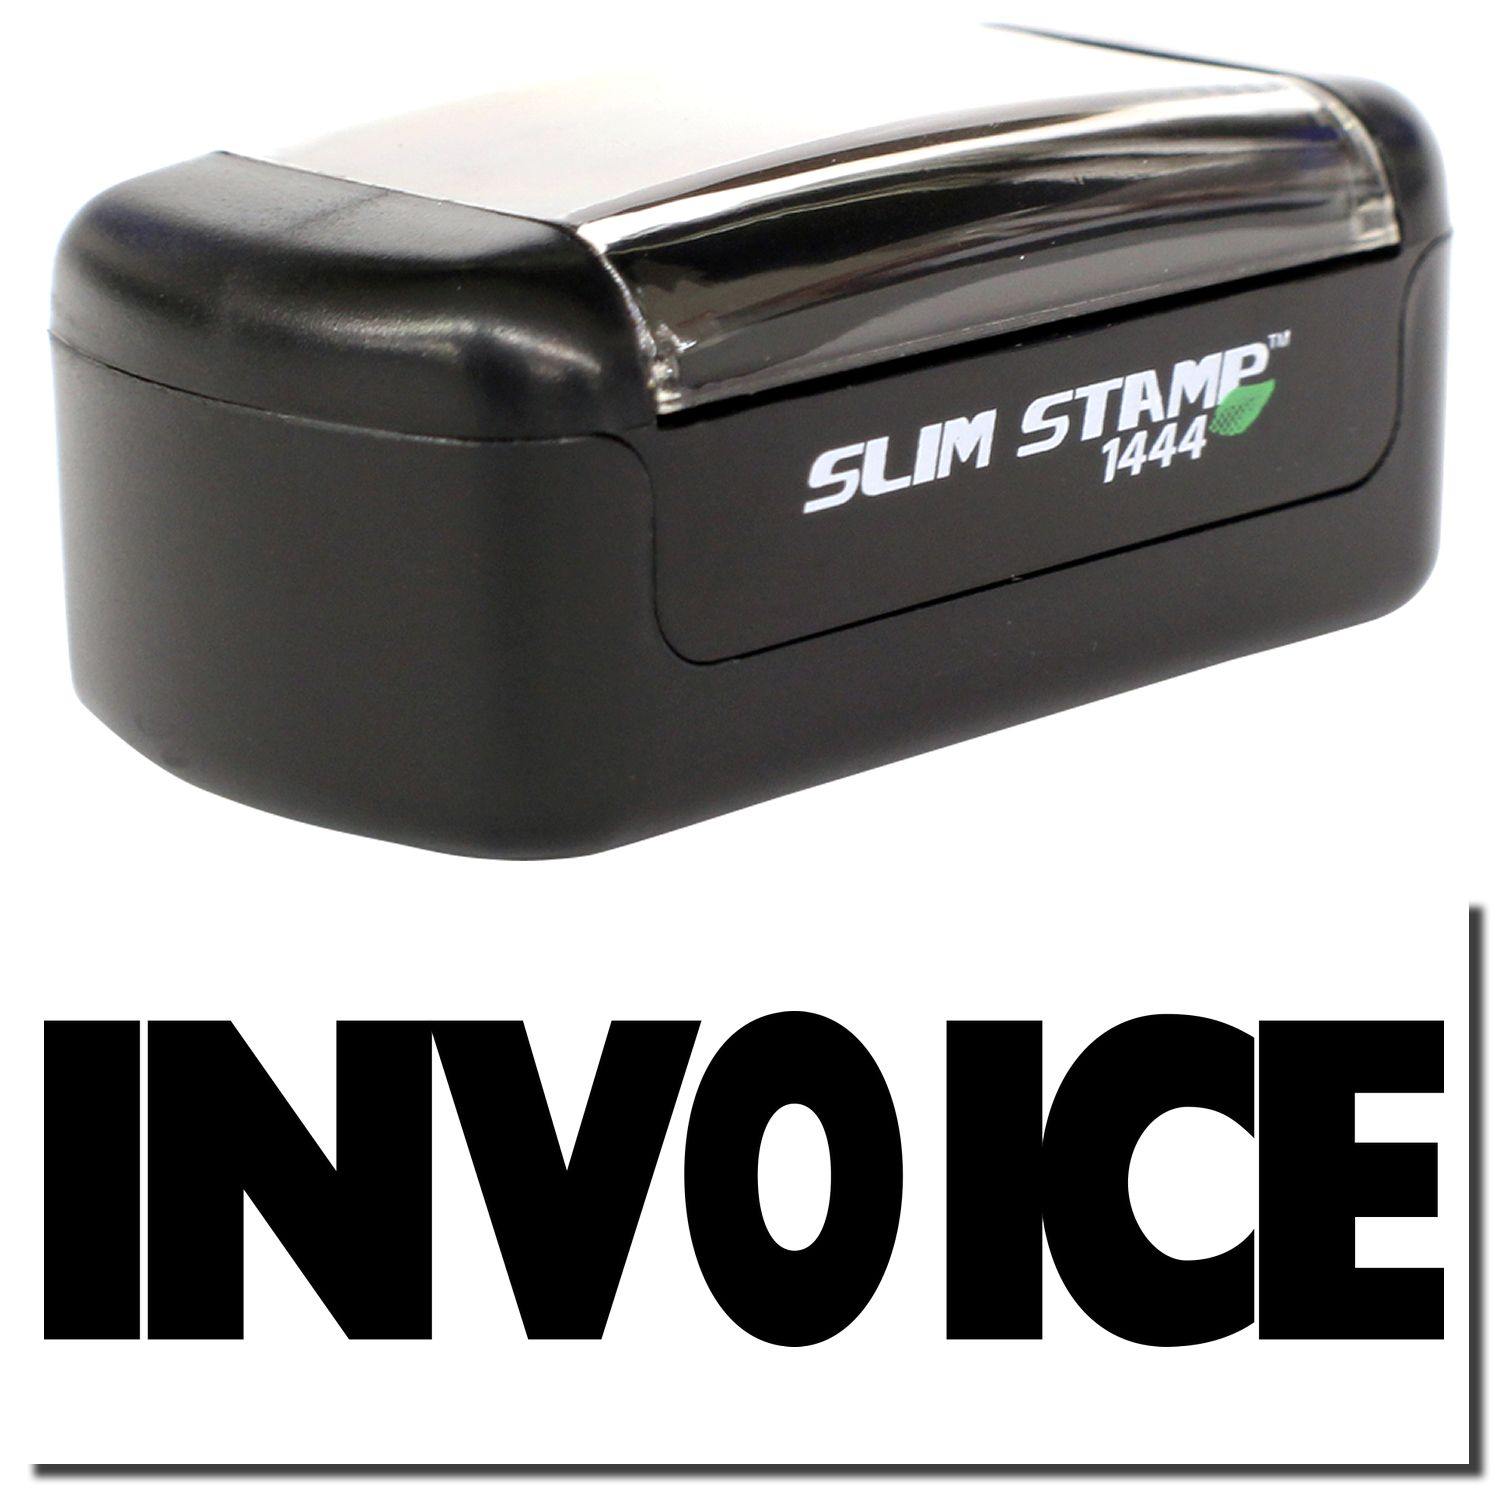 A stock office pre-inked stamp with a stamped image showing how the text "INVOICE" is displayed after stamping.